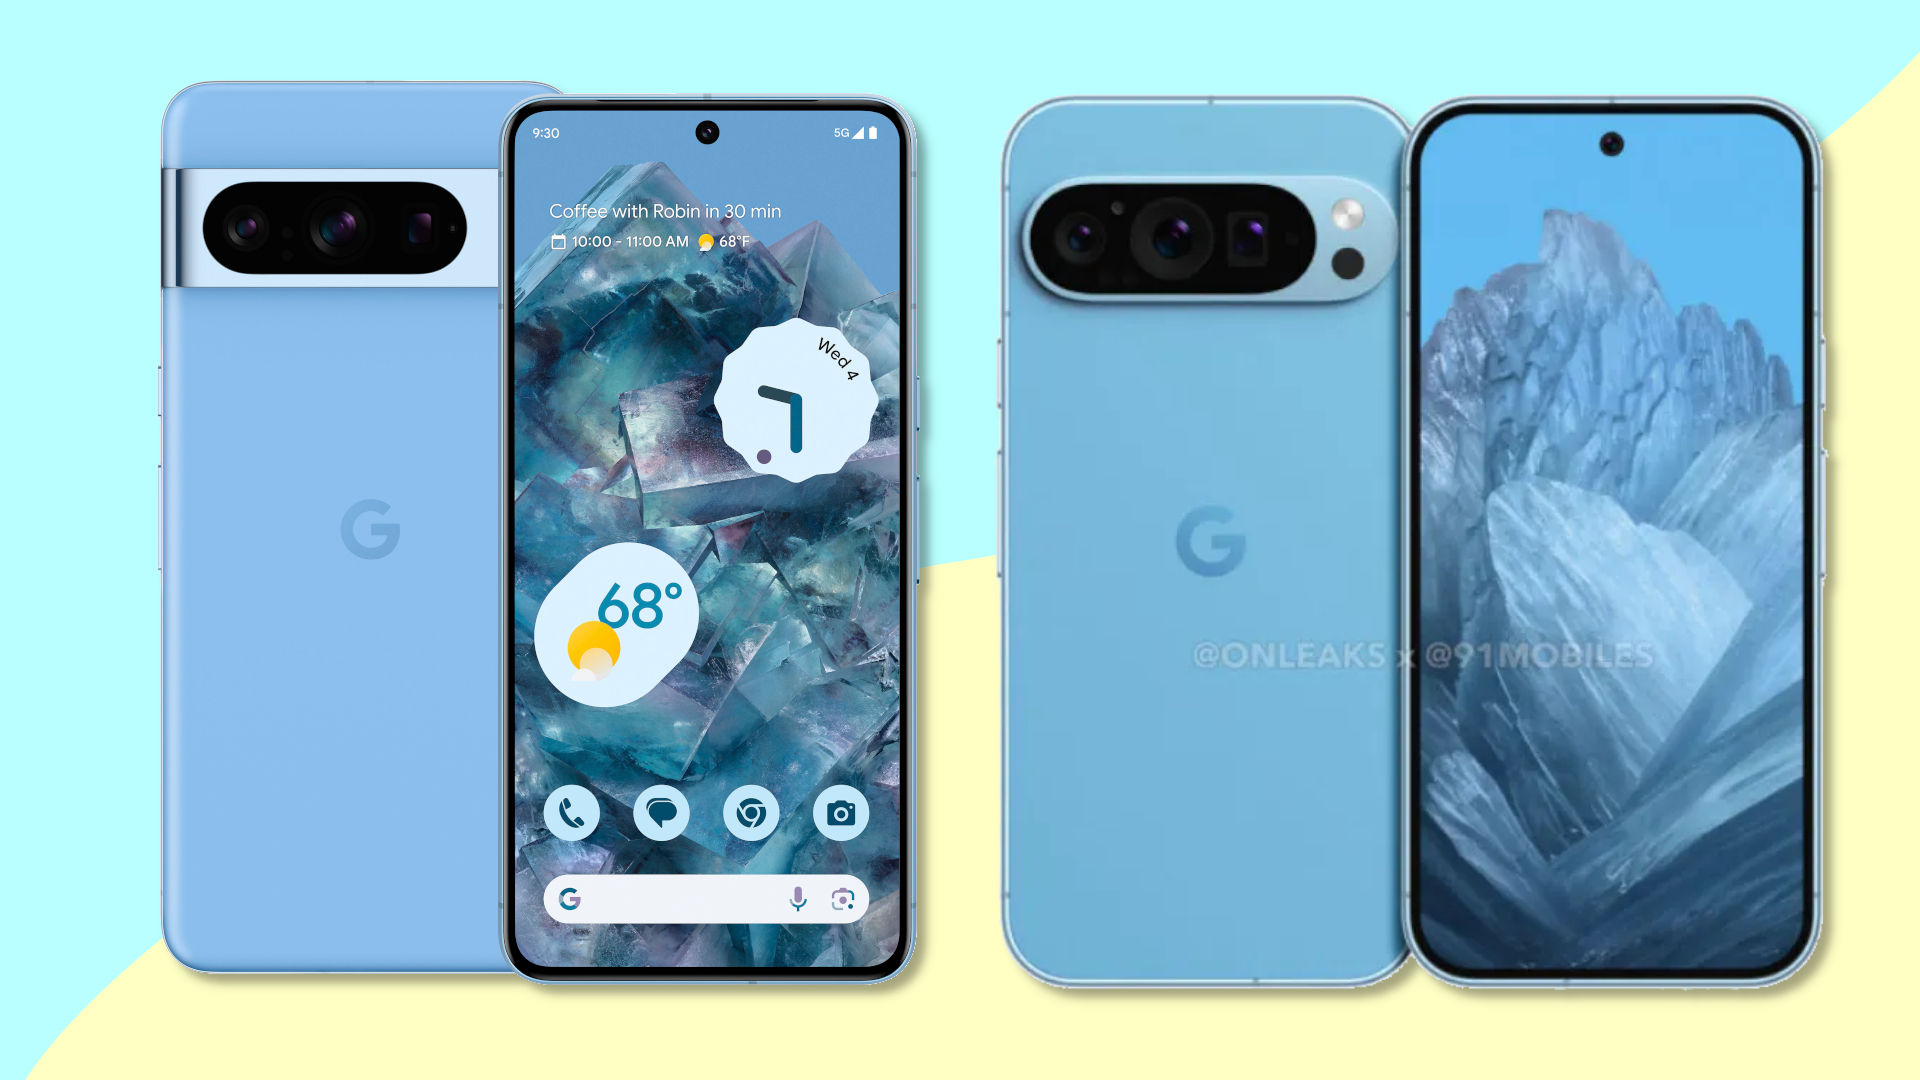 Image of the Google Pixel 8 Android smartphone next to a render of the Google Pixel 9 Android smartphone based on leaked information